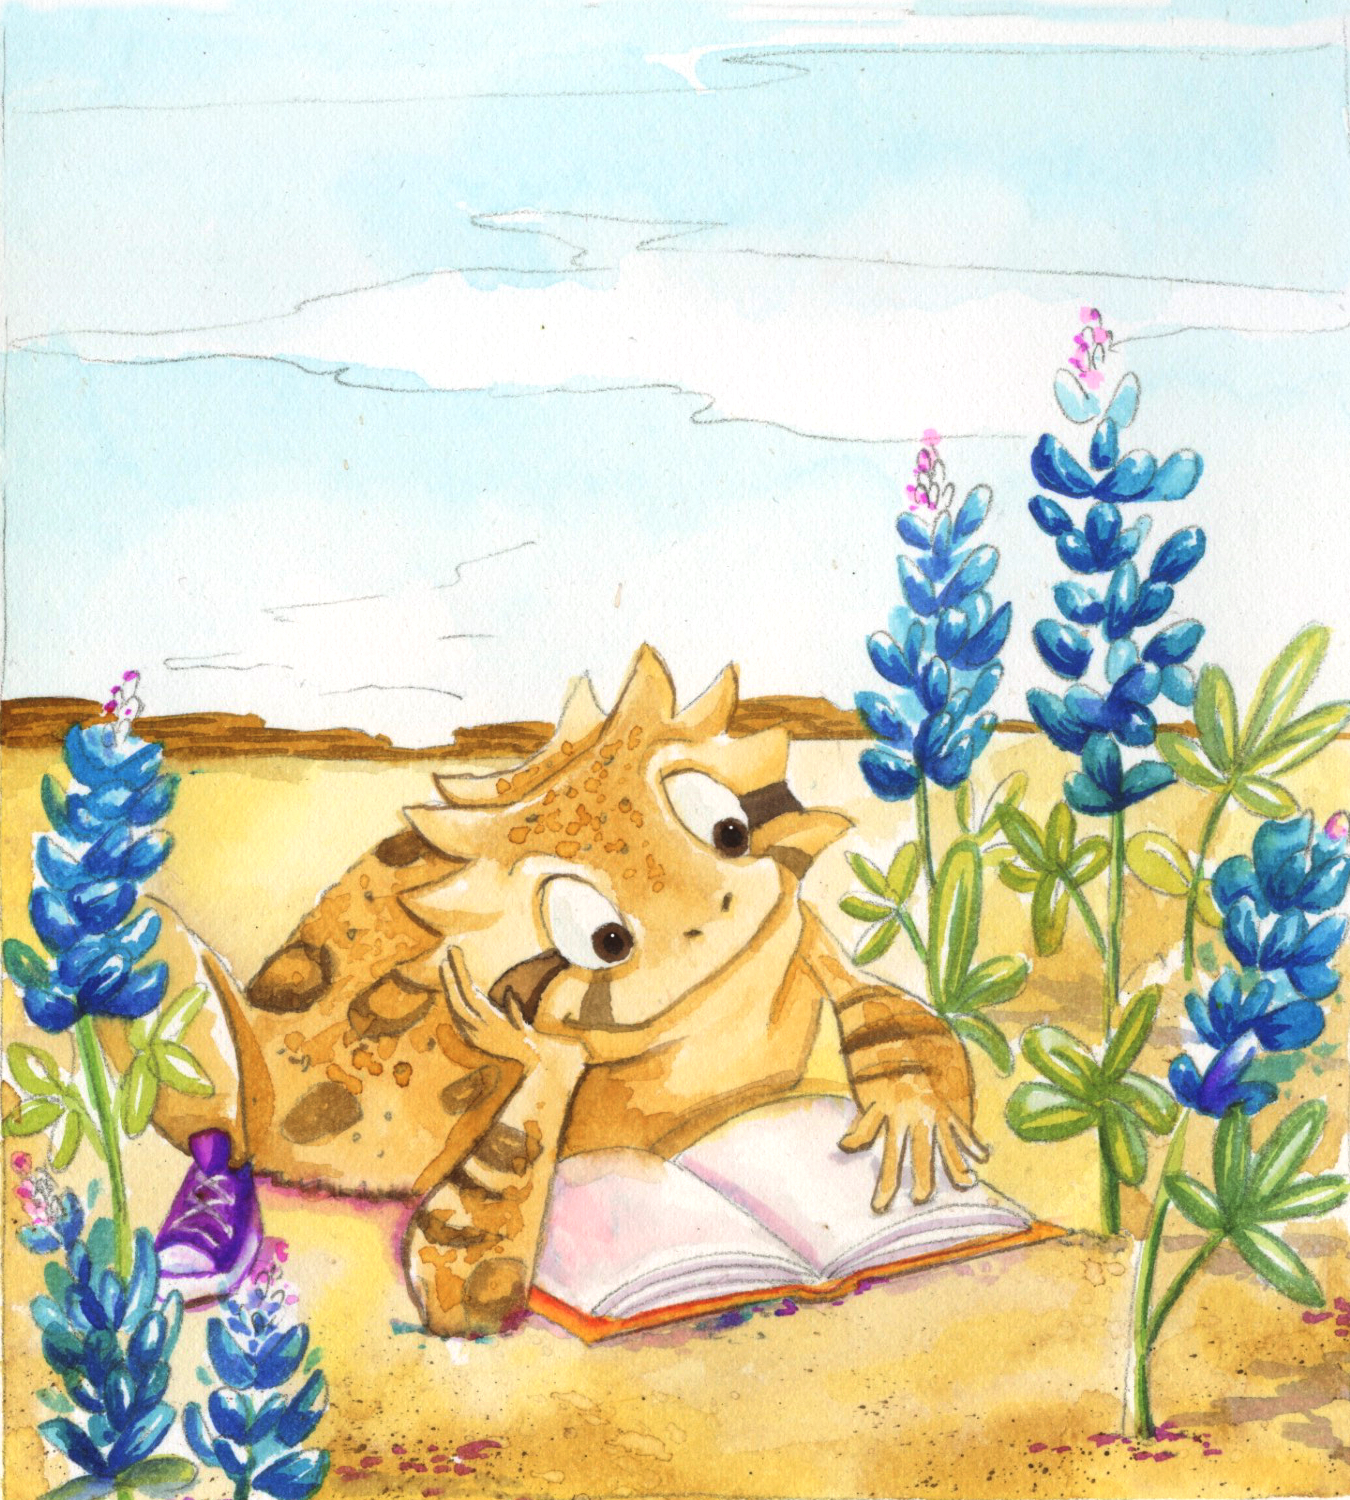 Illustration of an anthropomorphic horned lizard reading a book in a field of bluebonnets, the Texas state flower. Illustration by Holly Weinstein